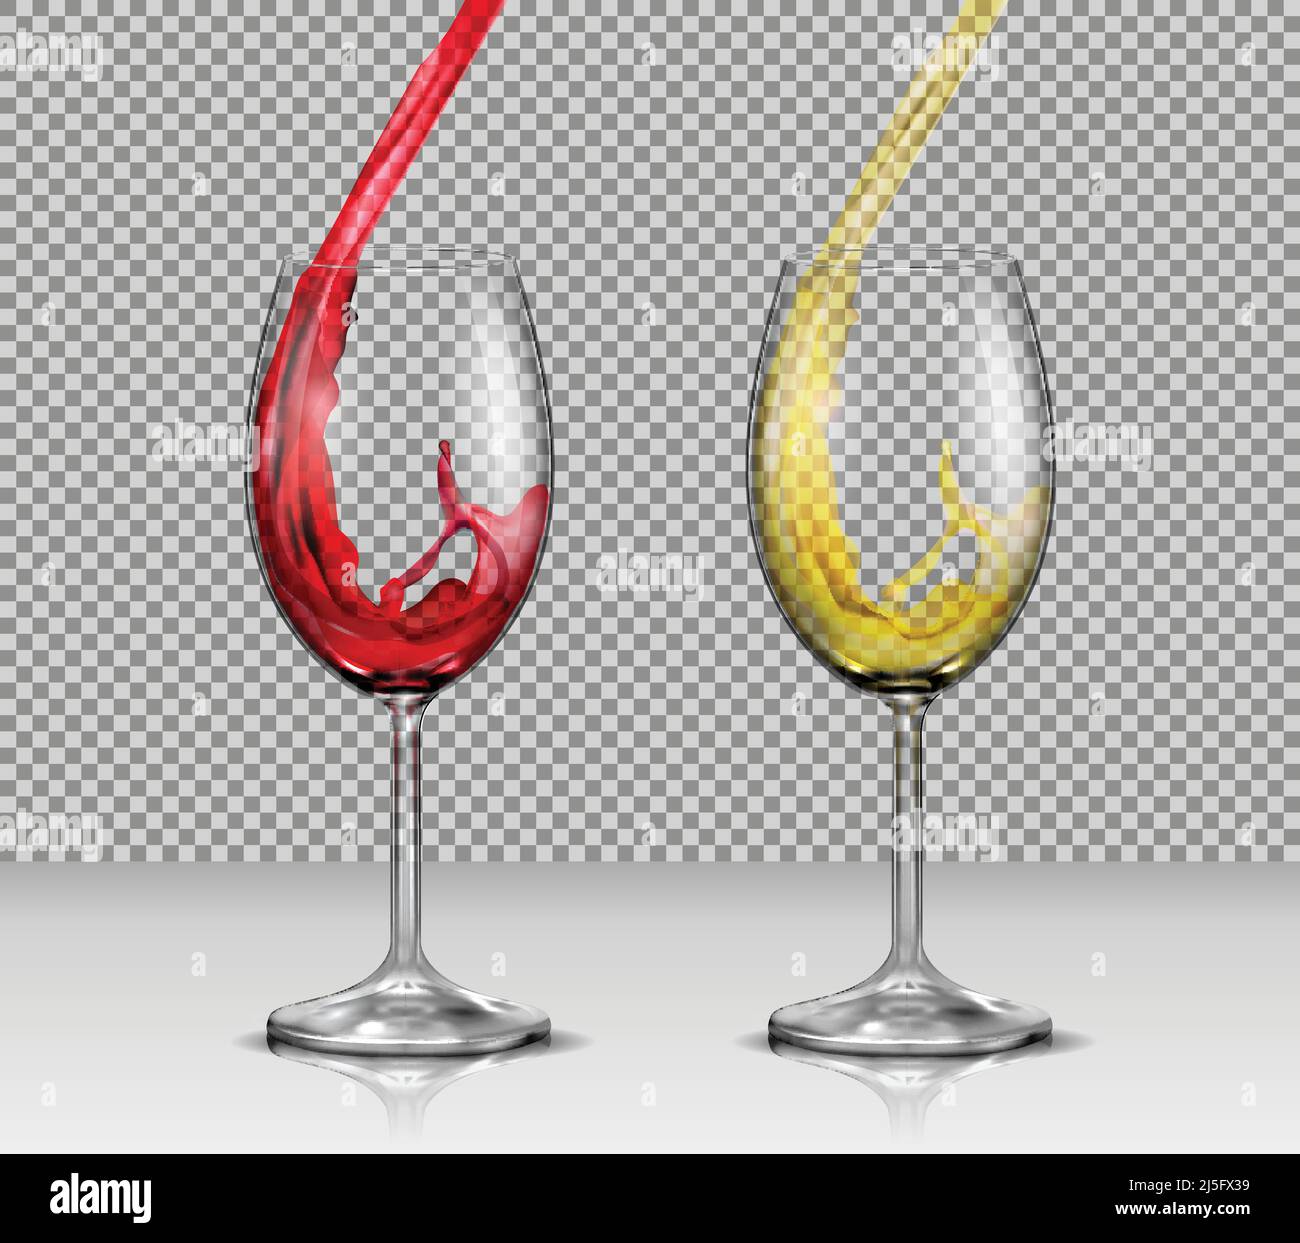 Set of vector illustrations of transparent glass wine glasses with white and red wine pouring in them, isolated. Print, template, design element Stock Vector